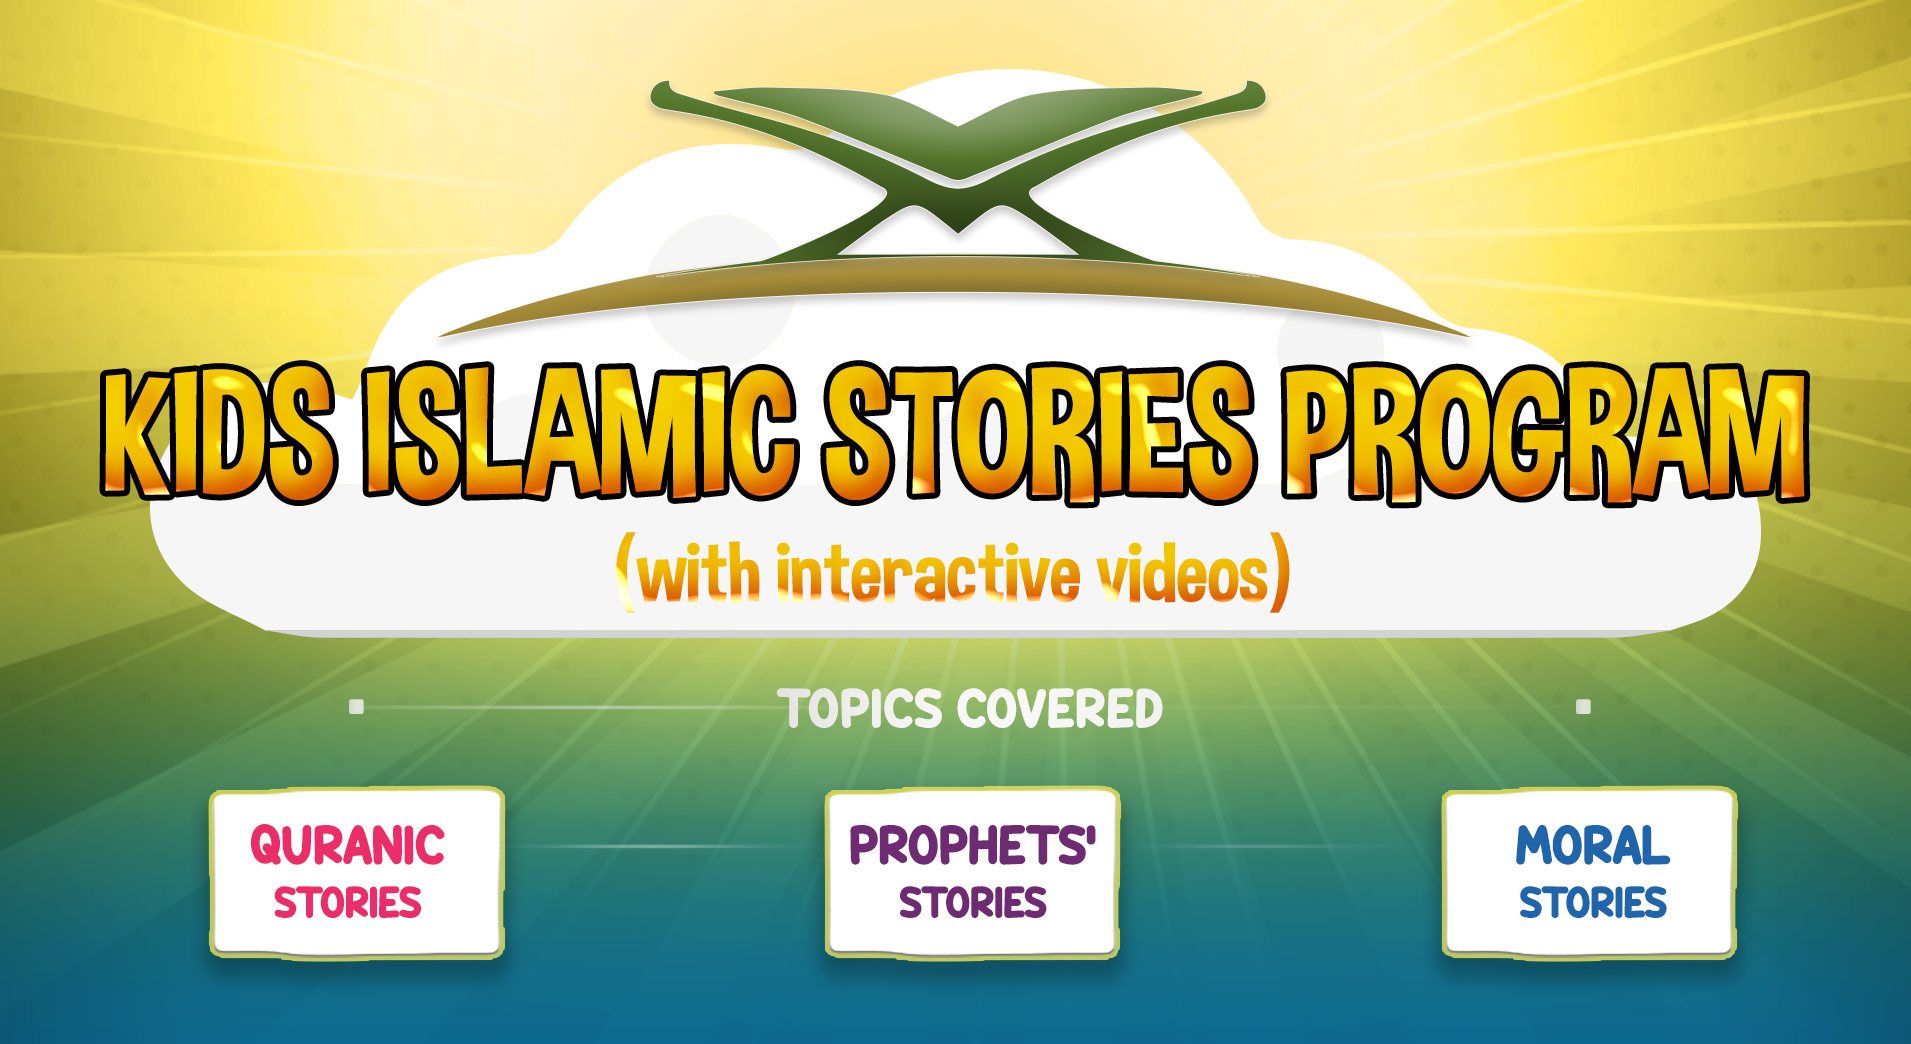 ISLAMIC MORAL STORIES FOR KIDS